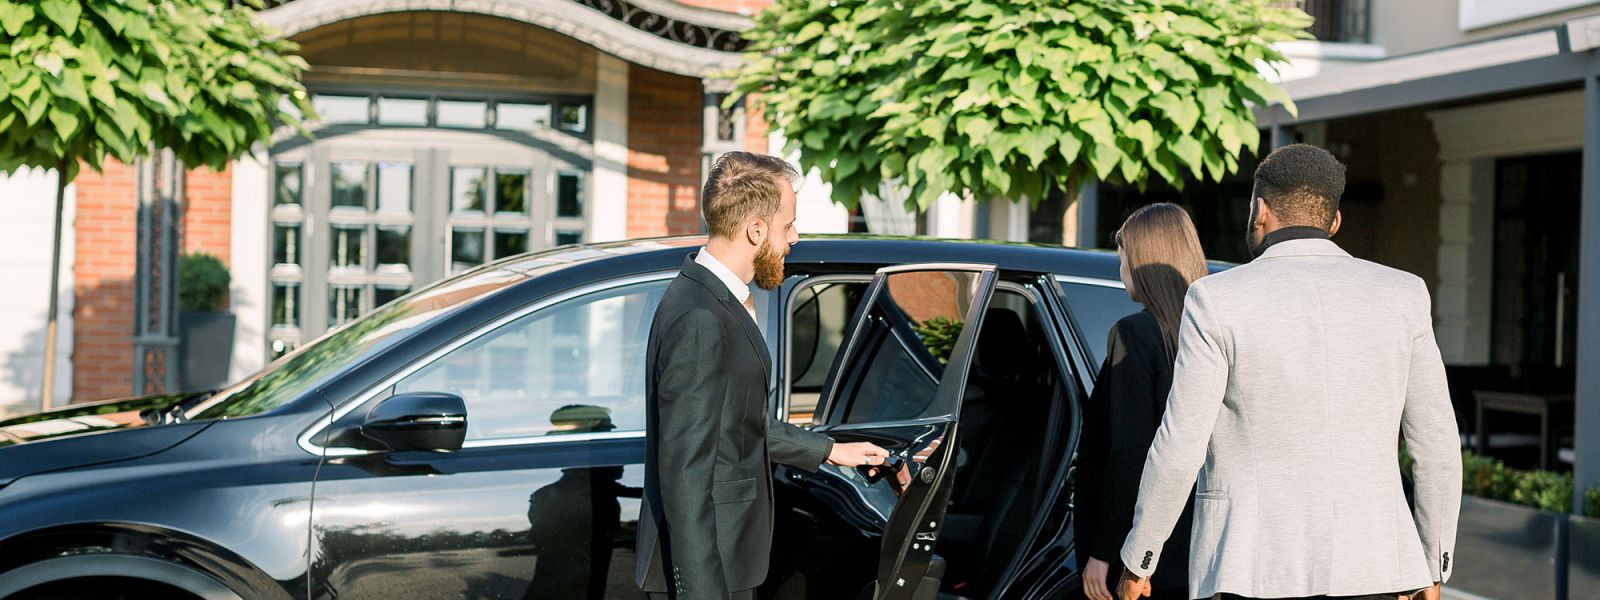 Chauffeurs working at Marshall Chauffeur